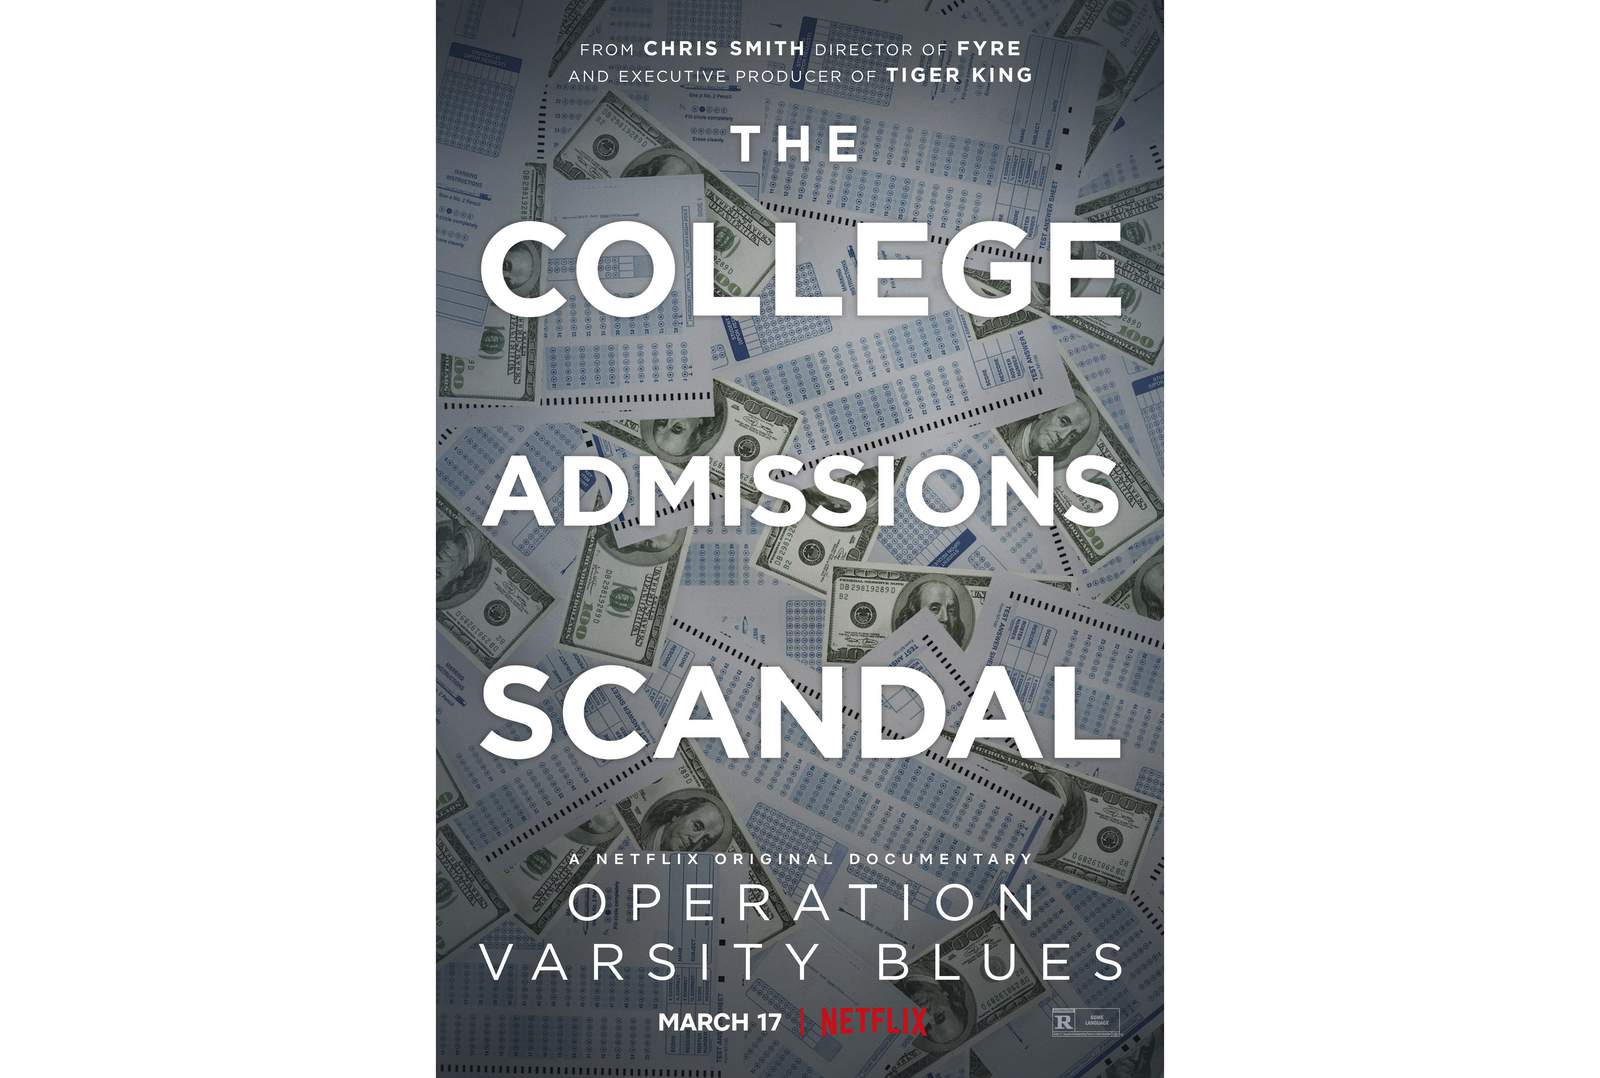 Netflix doc to examine man behind college admissions scandal